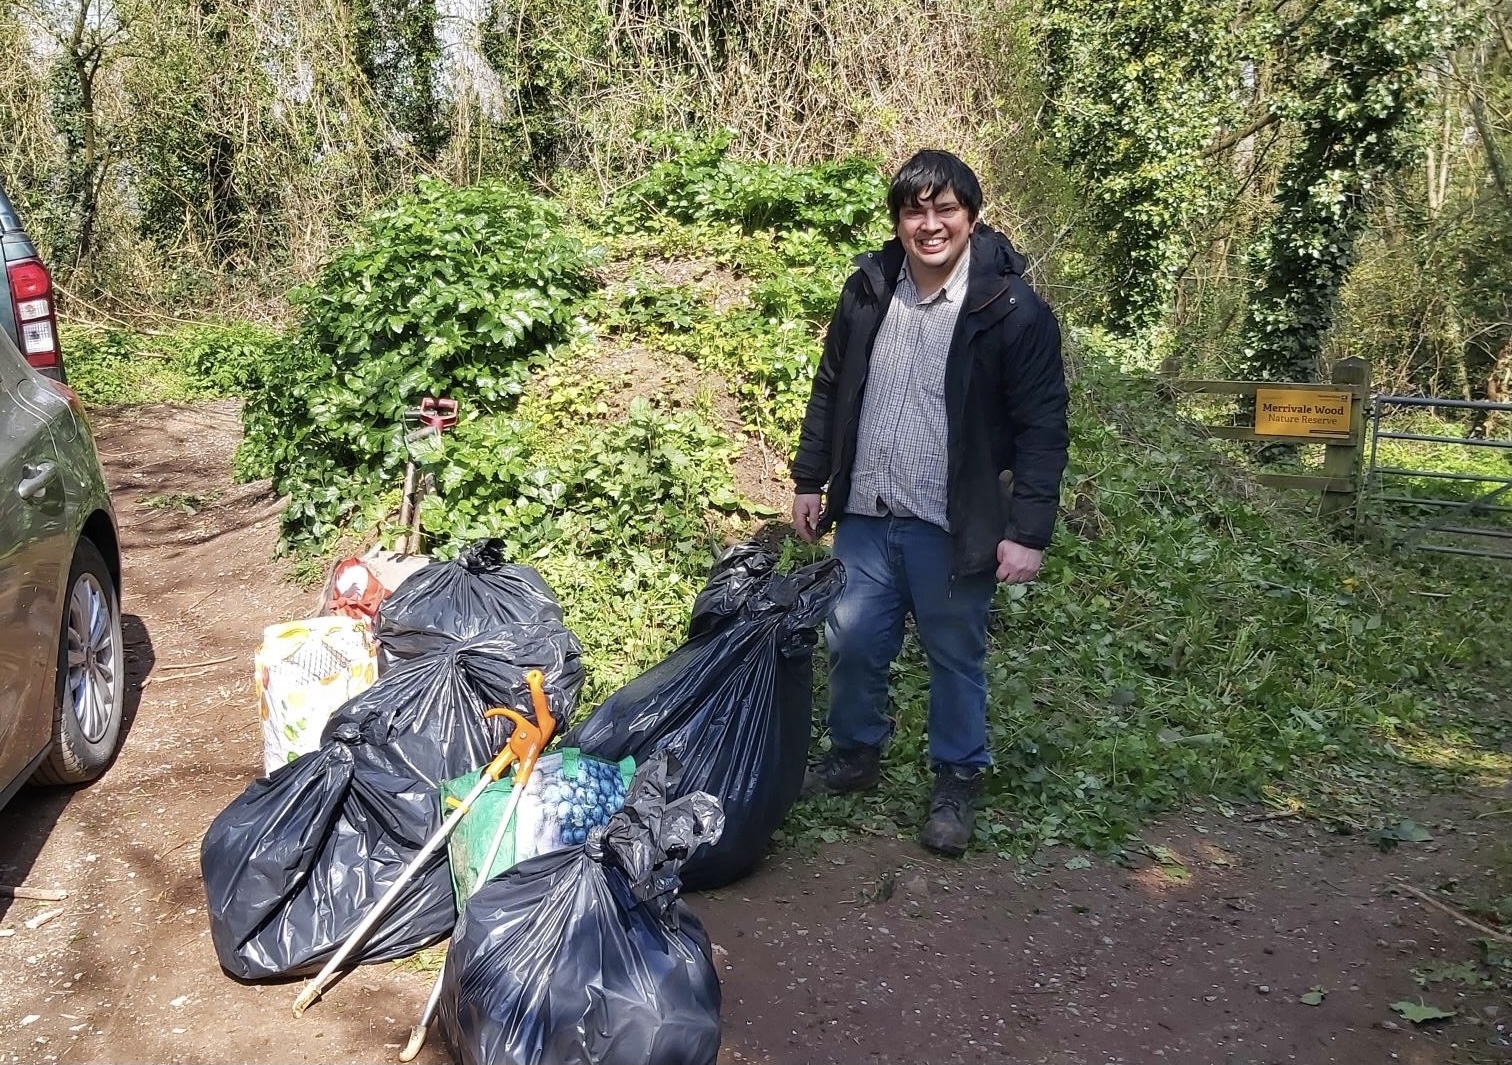 NEWS | Vandalism and litter an ongoing problem at Herefordshire beauty spot